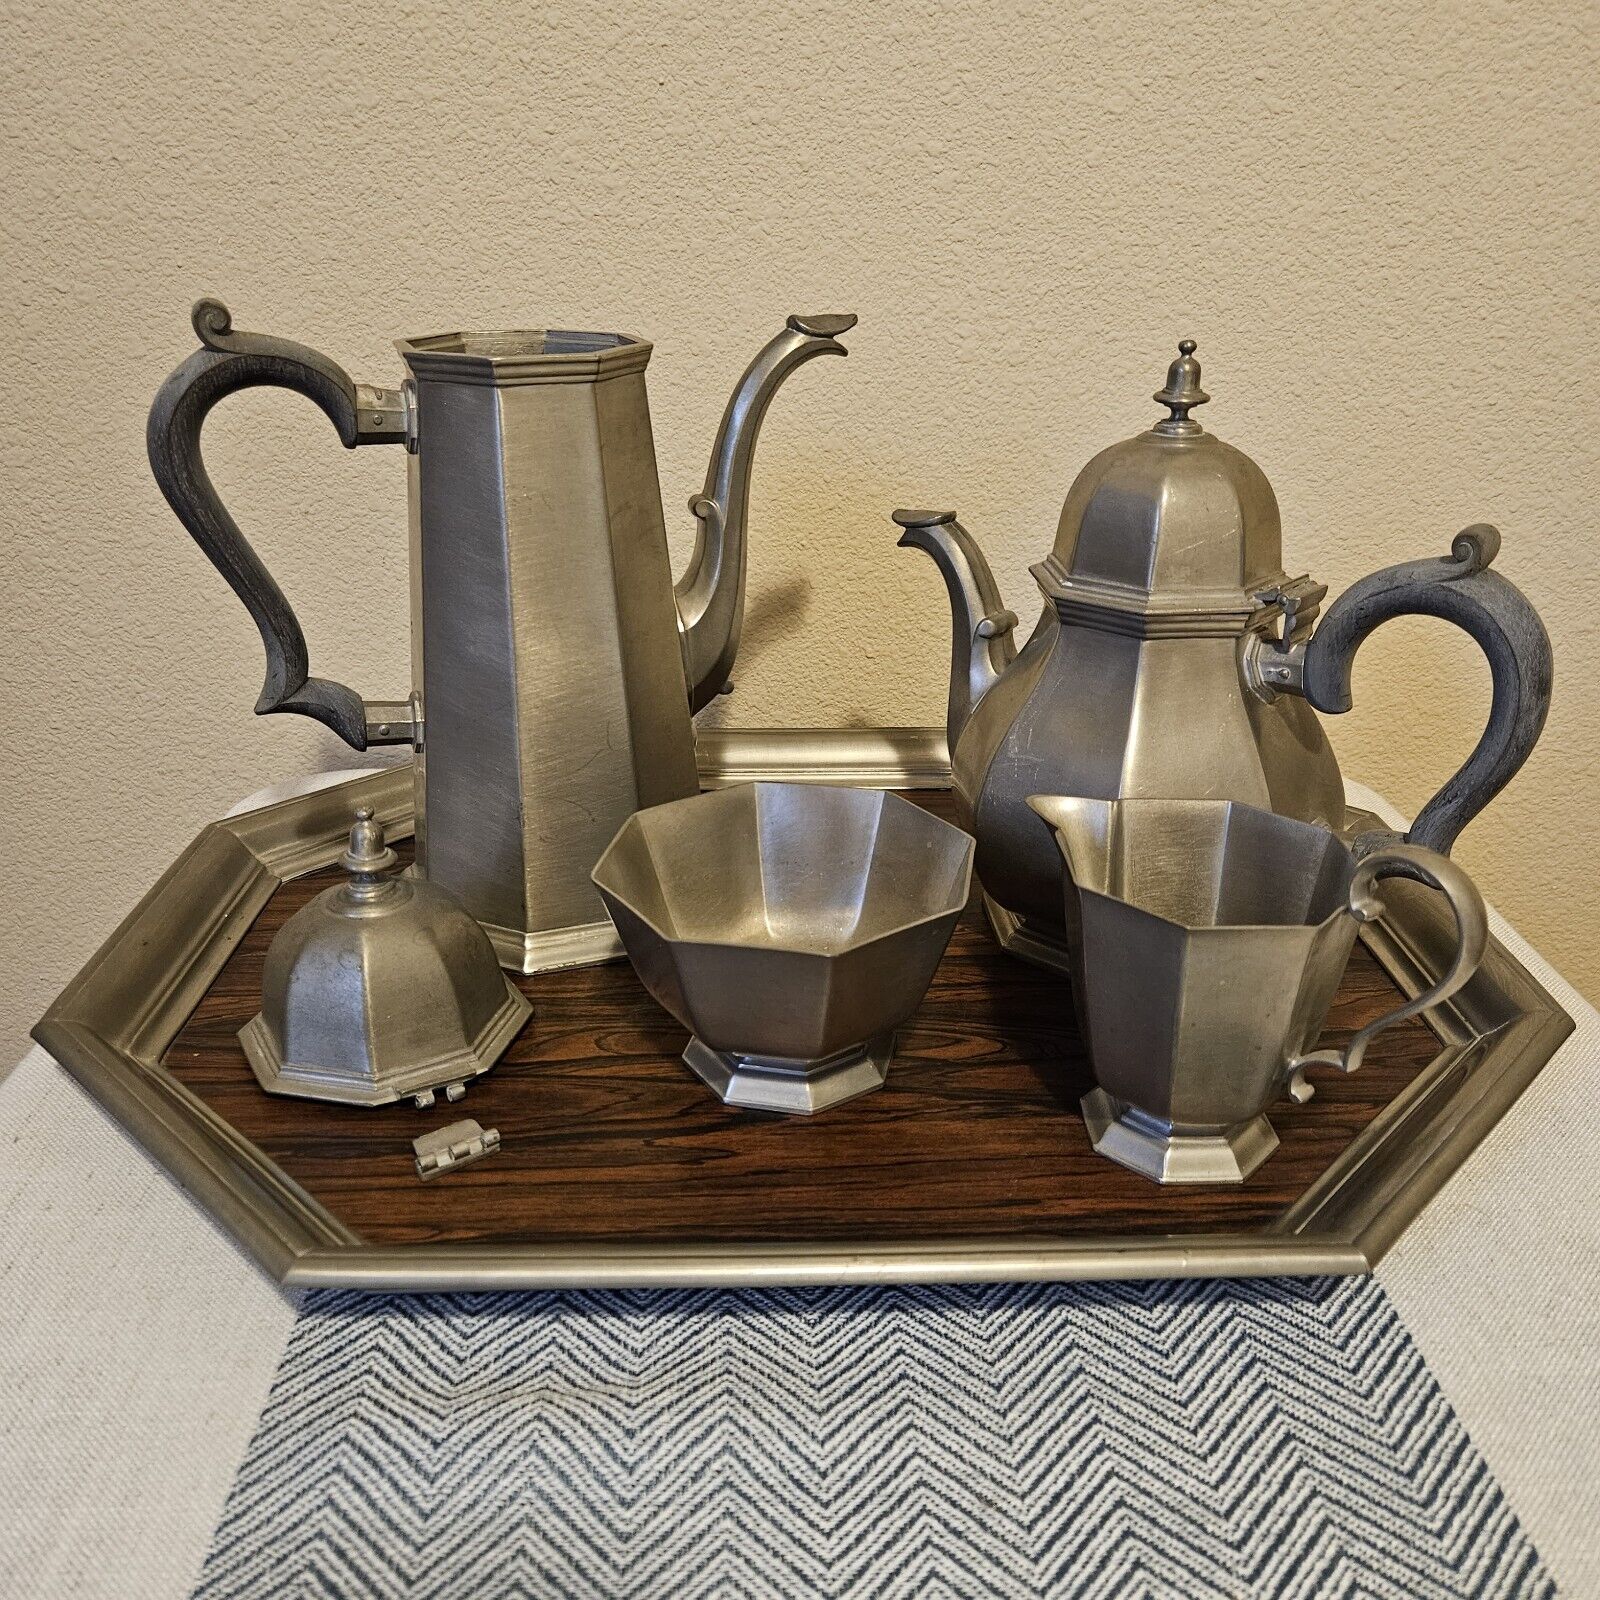 Gorham Pewter Octette Vintage 1970s 5 Pc Coffee & Tea Serving Set With Tray